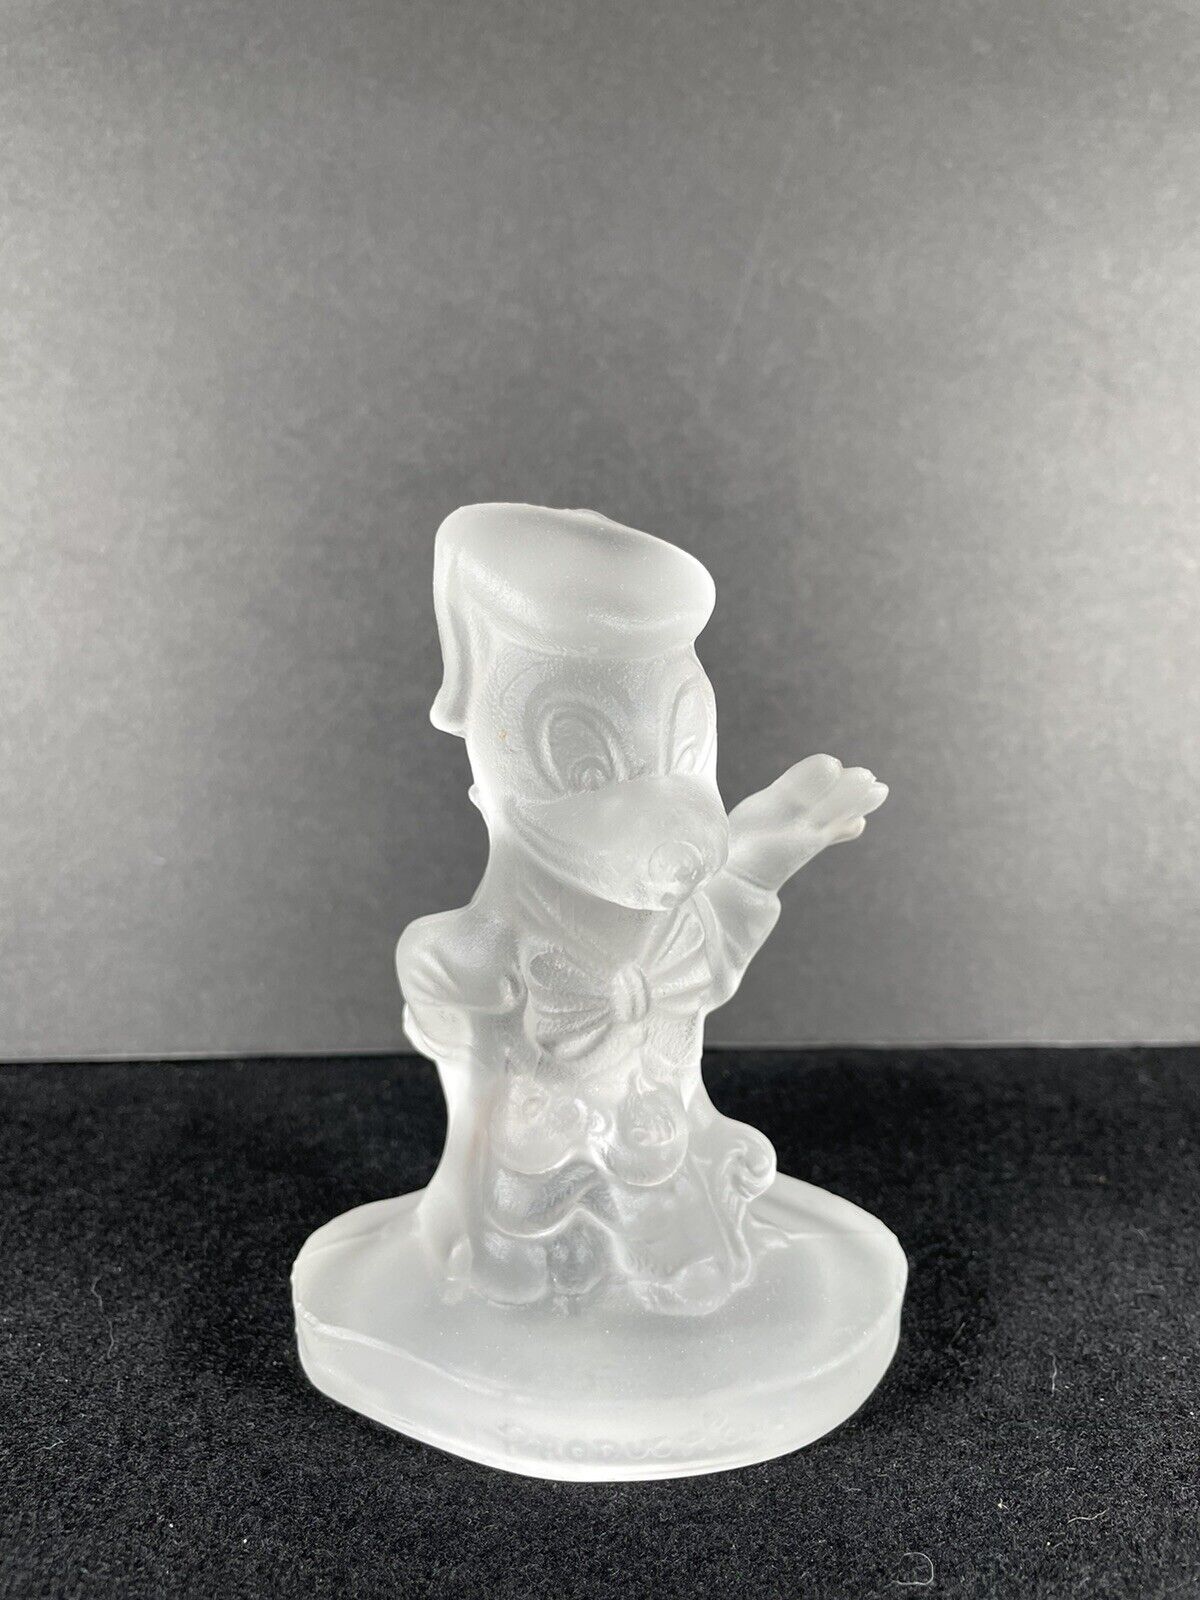 VINTAGE WALT DISNEY FROSTED GLASS DONALD DUCK FIGURE ON STAND